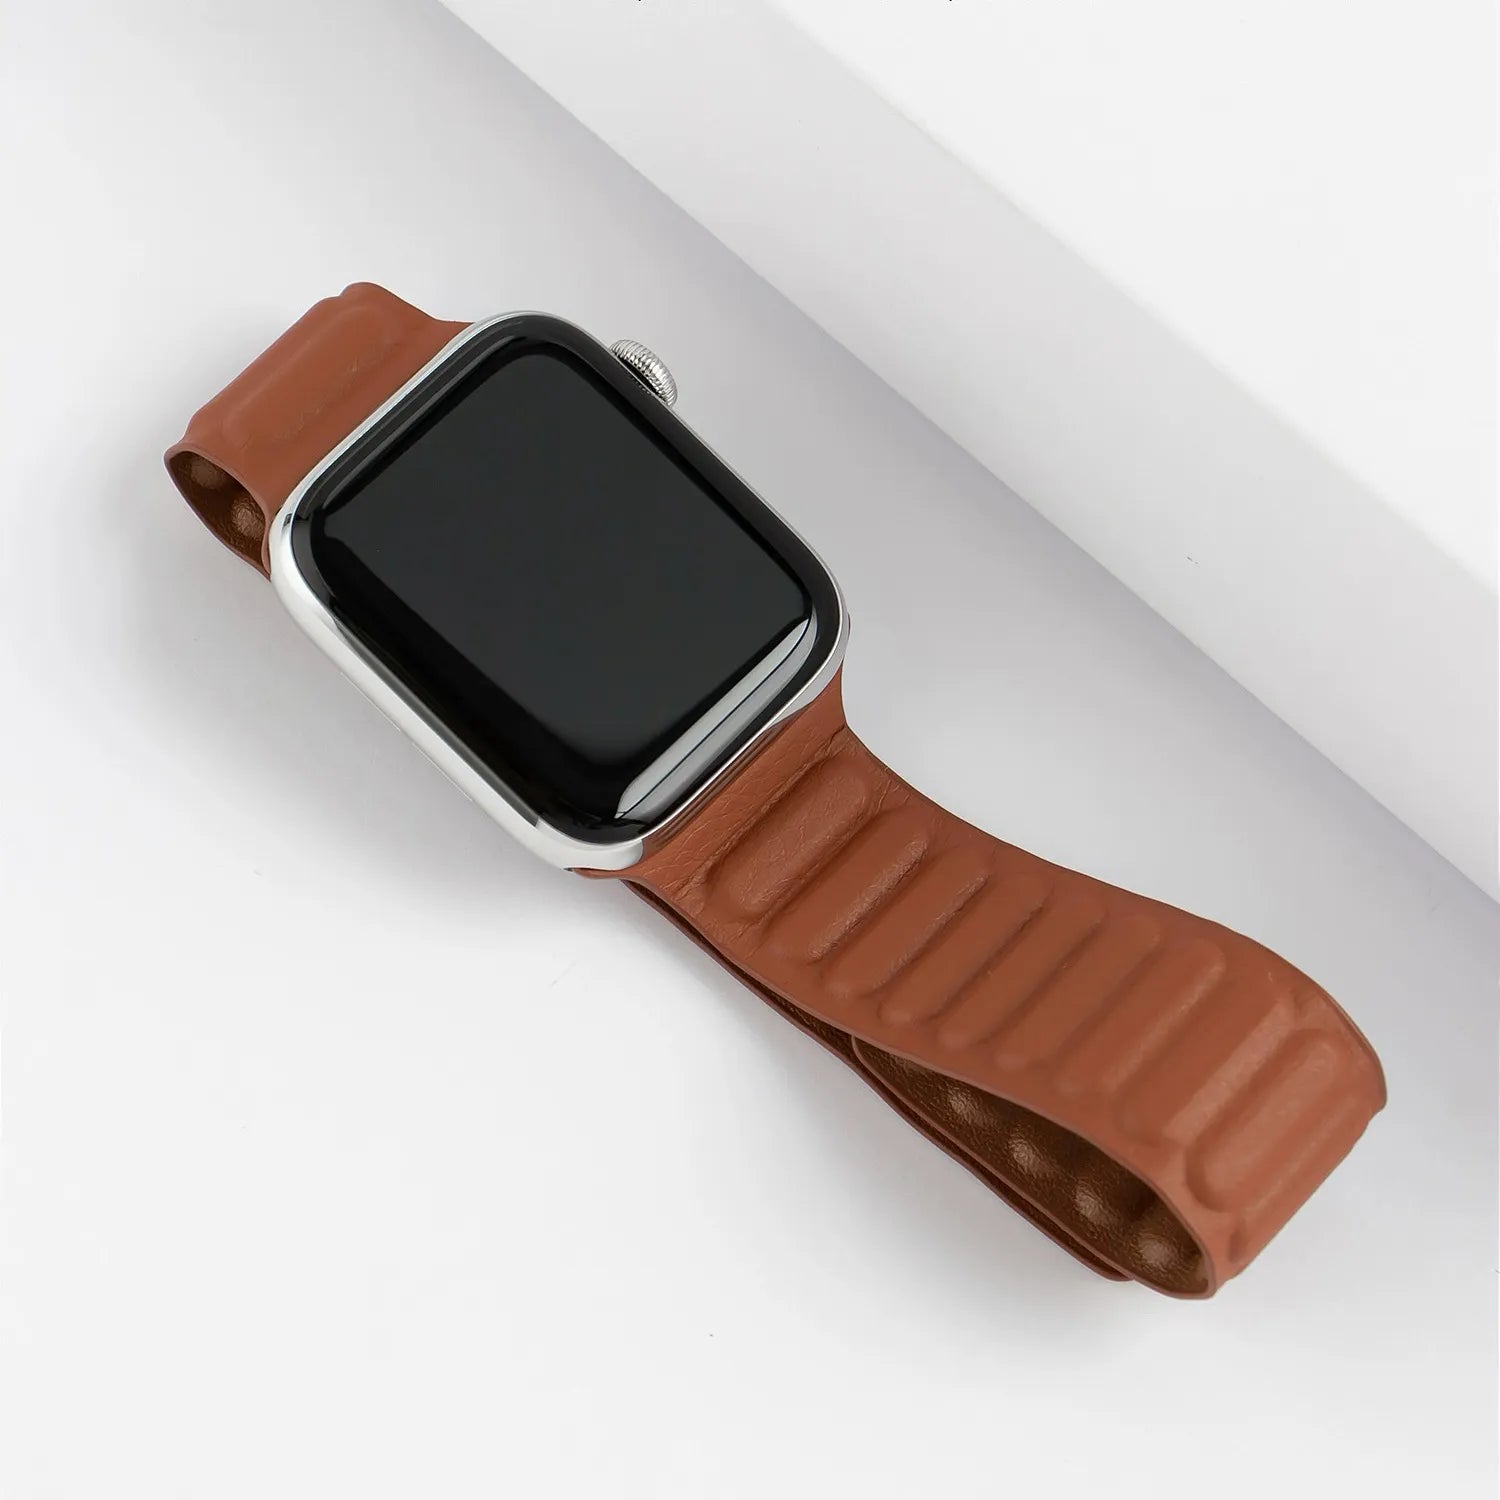 Magnetized leather links - Leather Bracelet Apple Watch - Band-Band